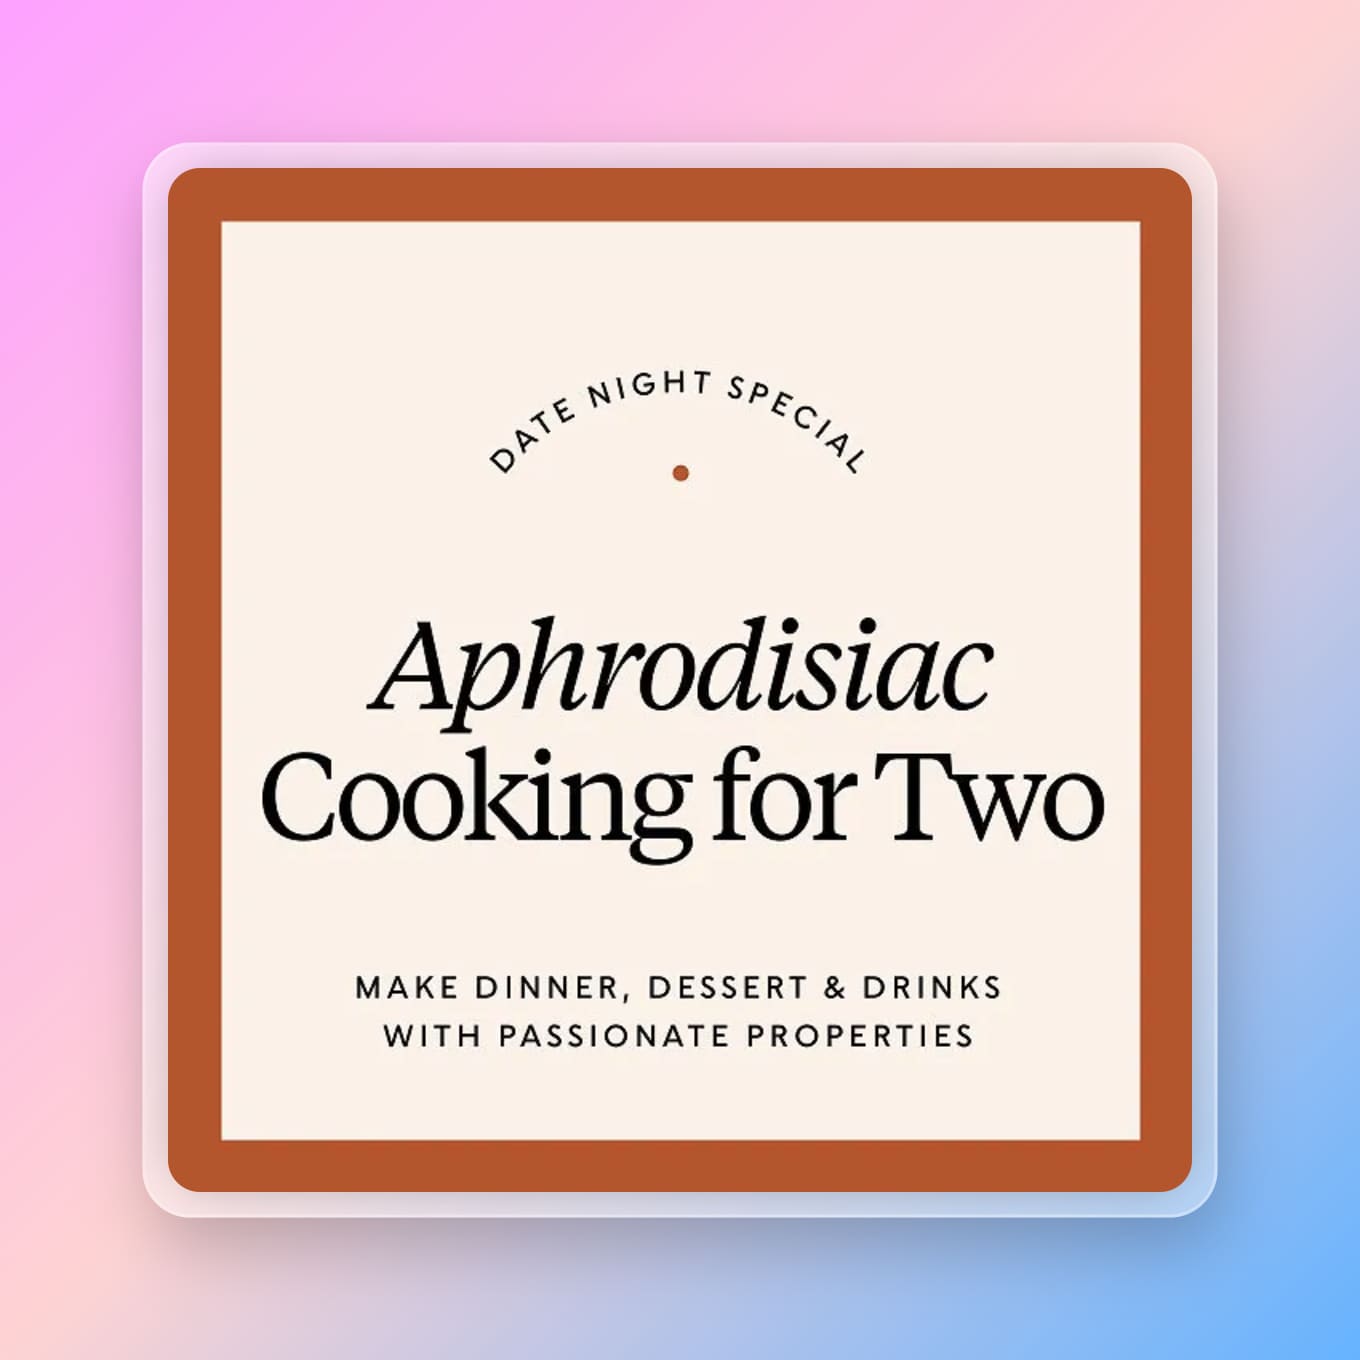 Aphrodisiac Cooking for Two - Date Night Special - Make dinner, dessert, and drinks with passionate properties